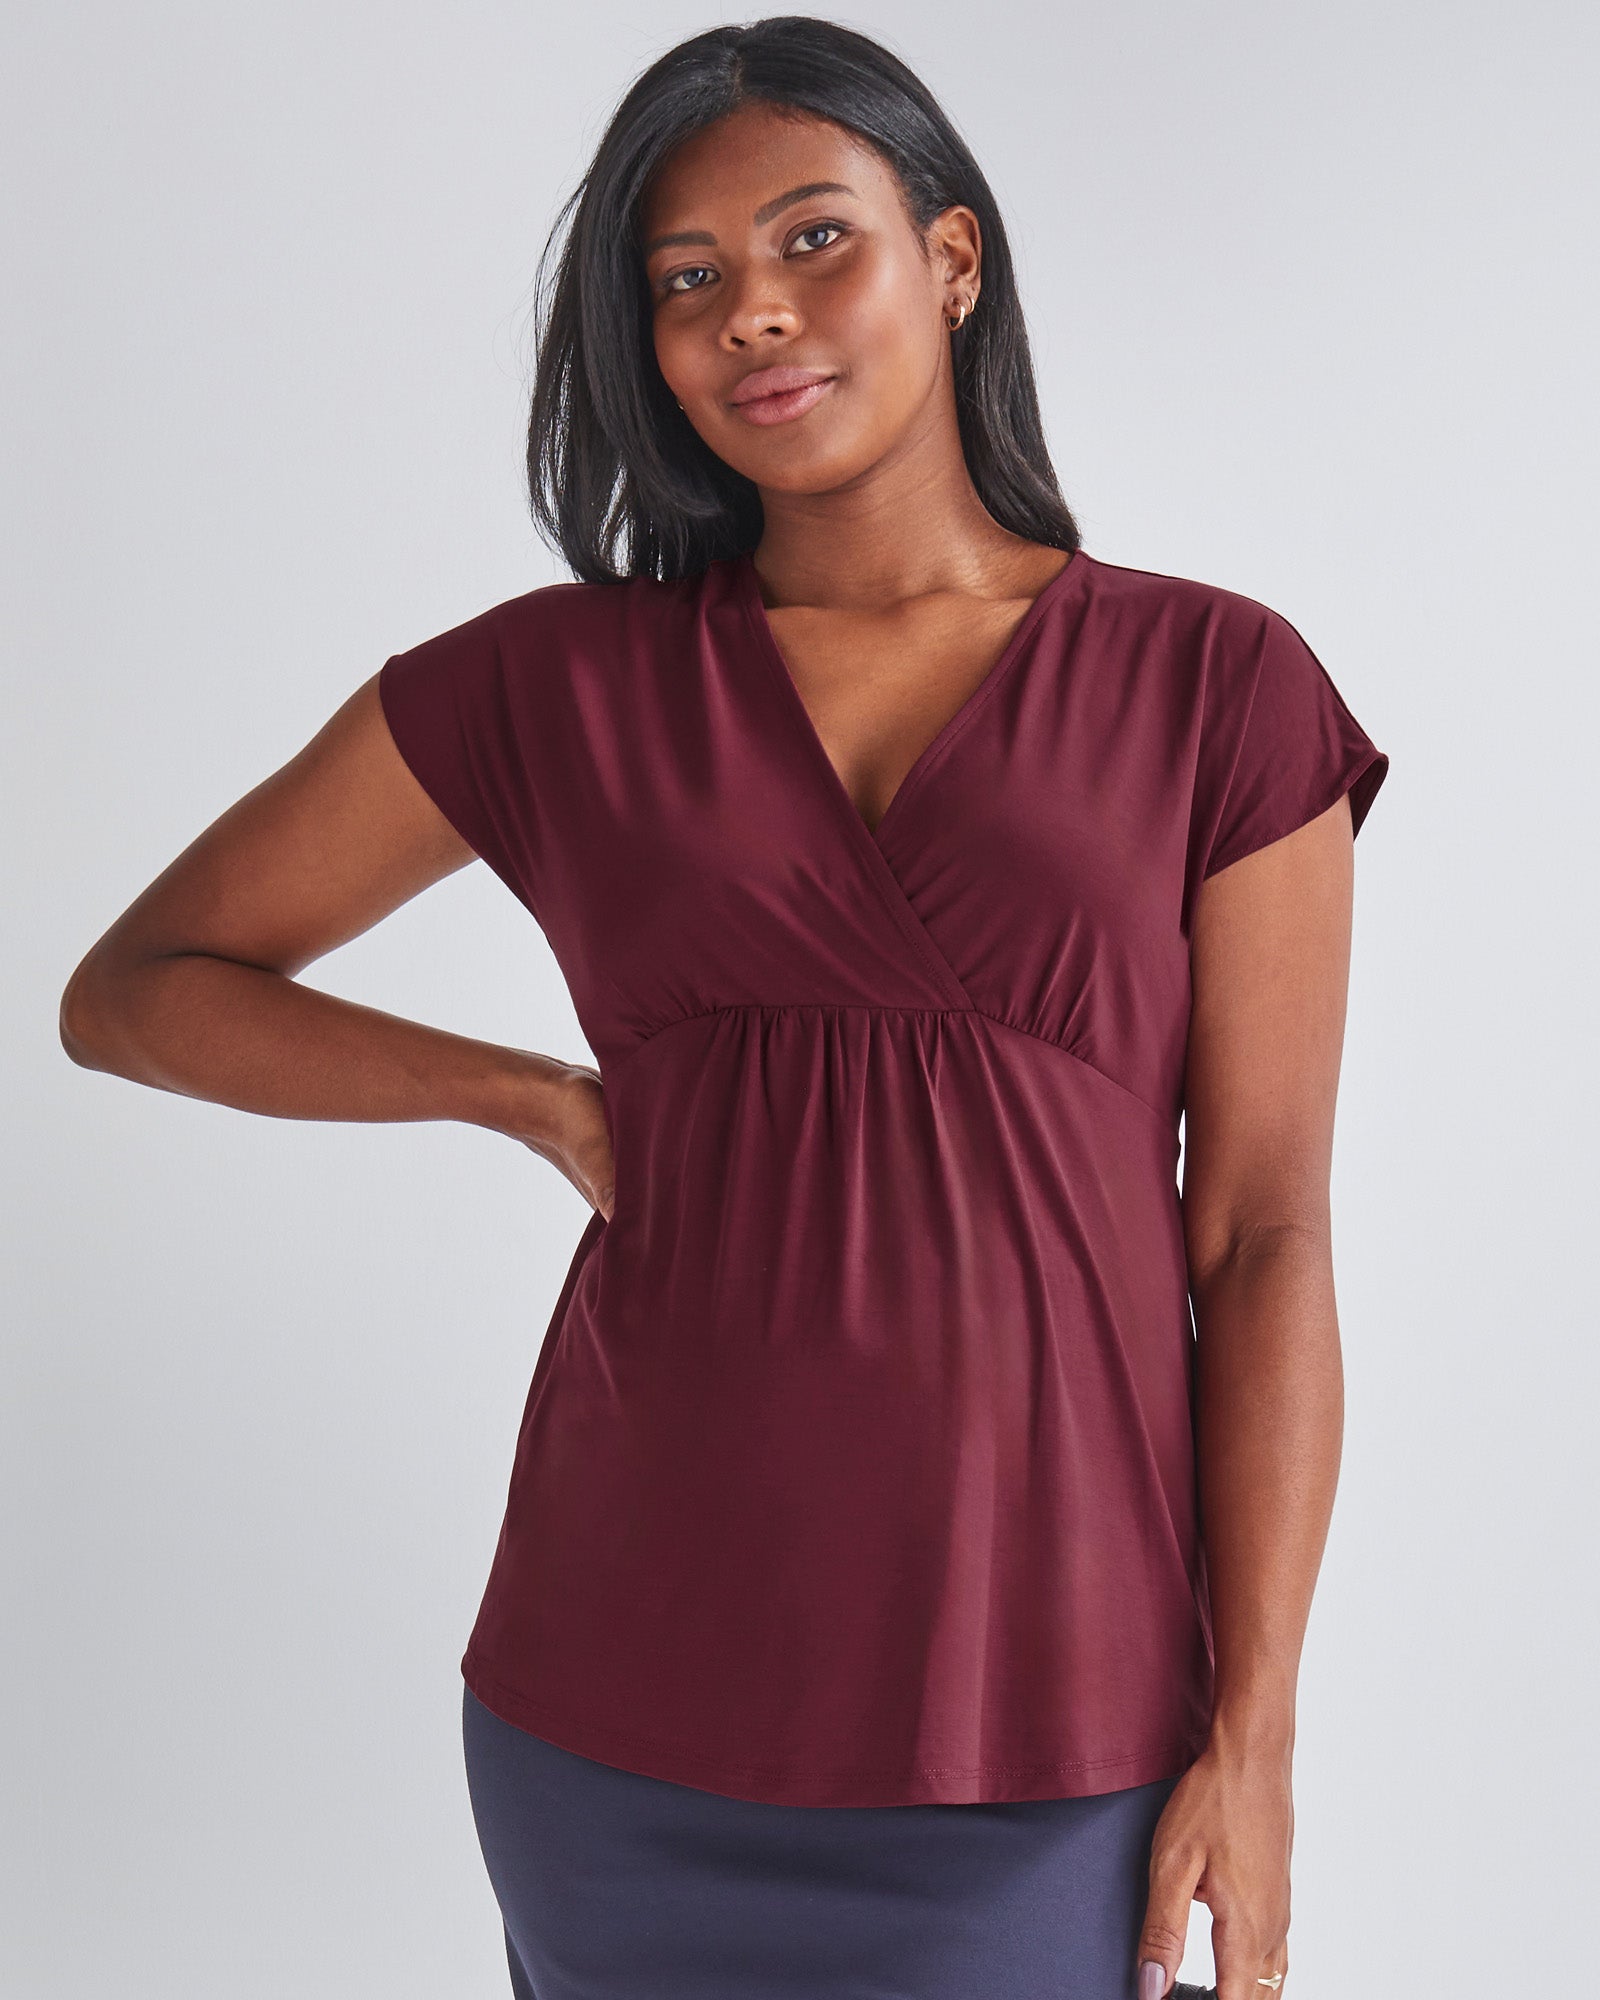 Main View - A Pregnannt Woman Wearing Maternity Crossover Burgundy Work Top in from Angel Maternity.